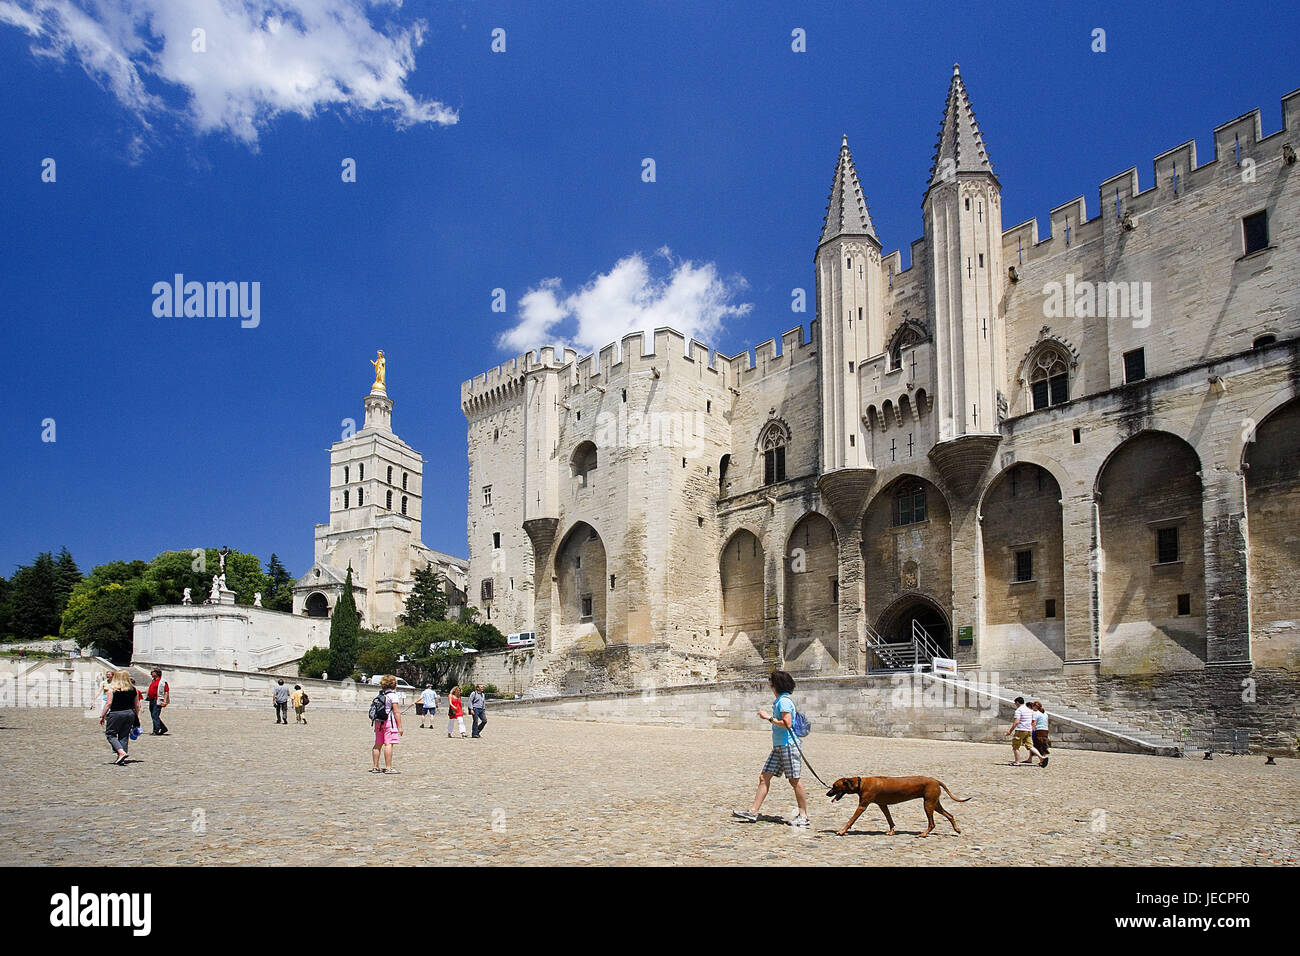 France, Provence, Avignon, town view, pope's palace, tourist, town, palace, doubles palace, structure, architecture, culture, place of interest, destination, tourism, UNESCO-world cultural heritage, person, sightseeing, Stock Photo